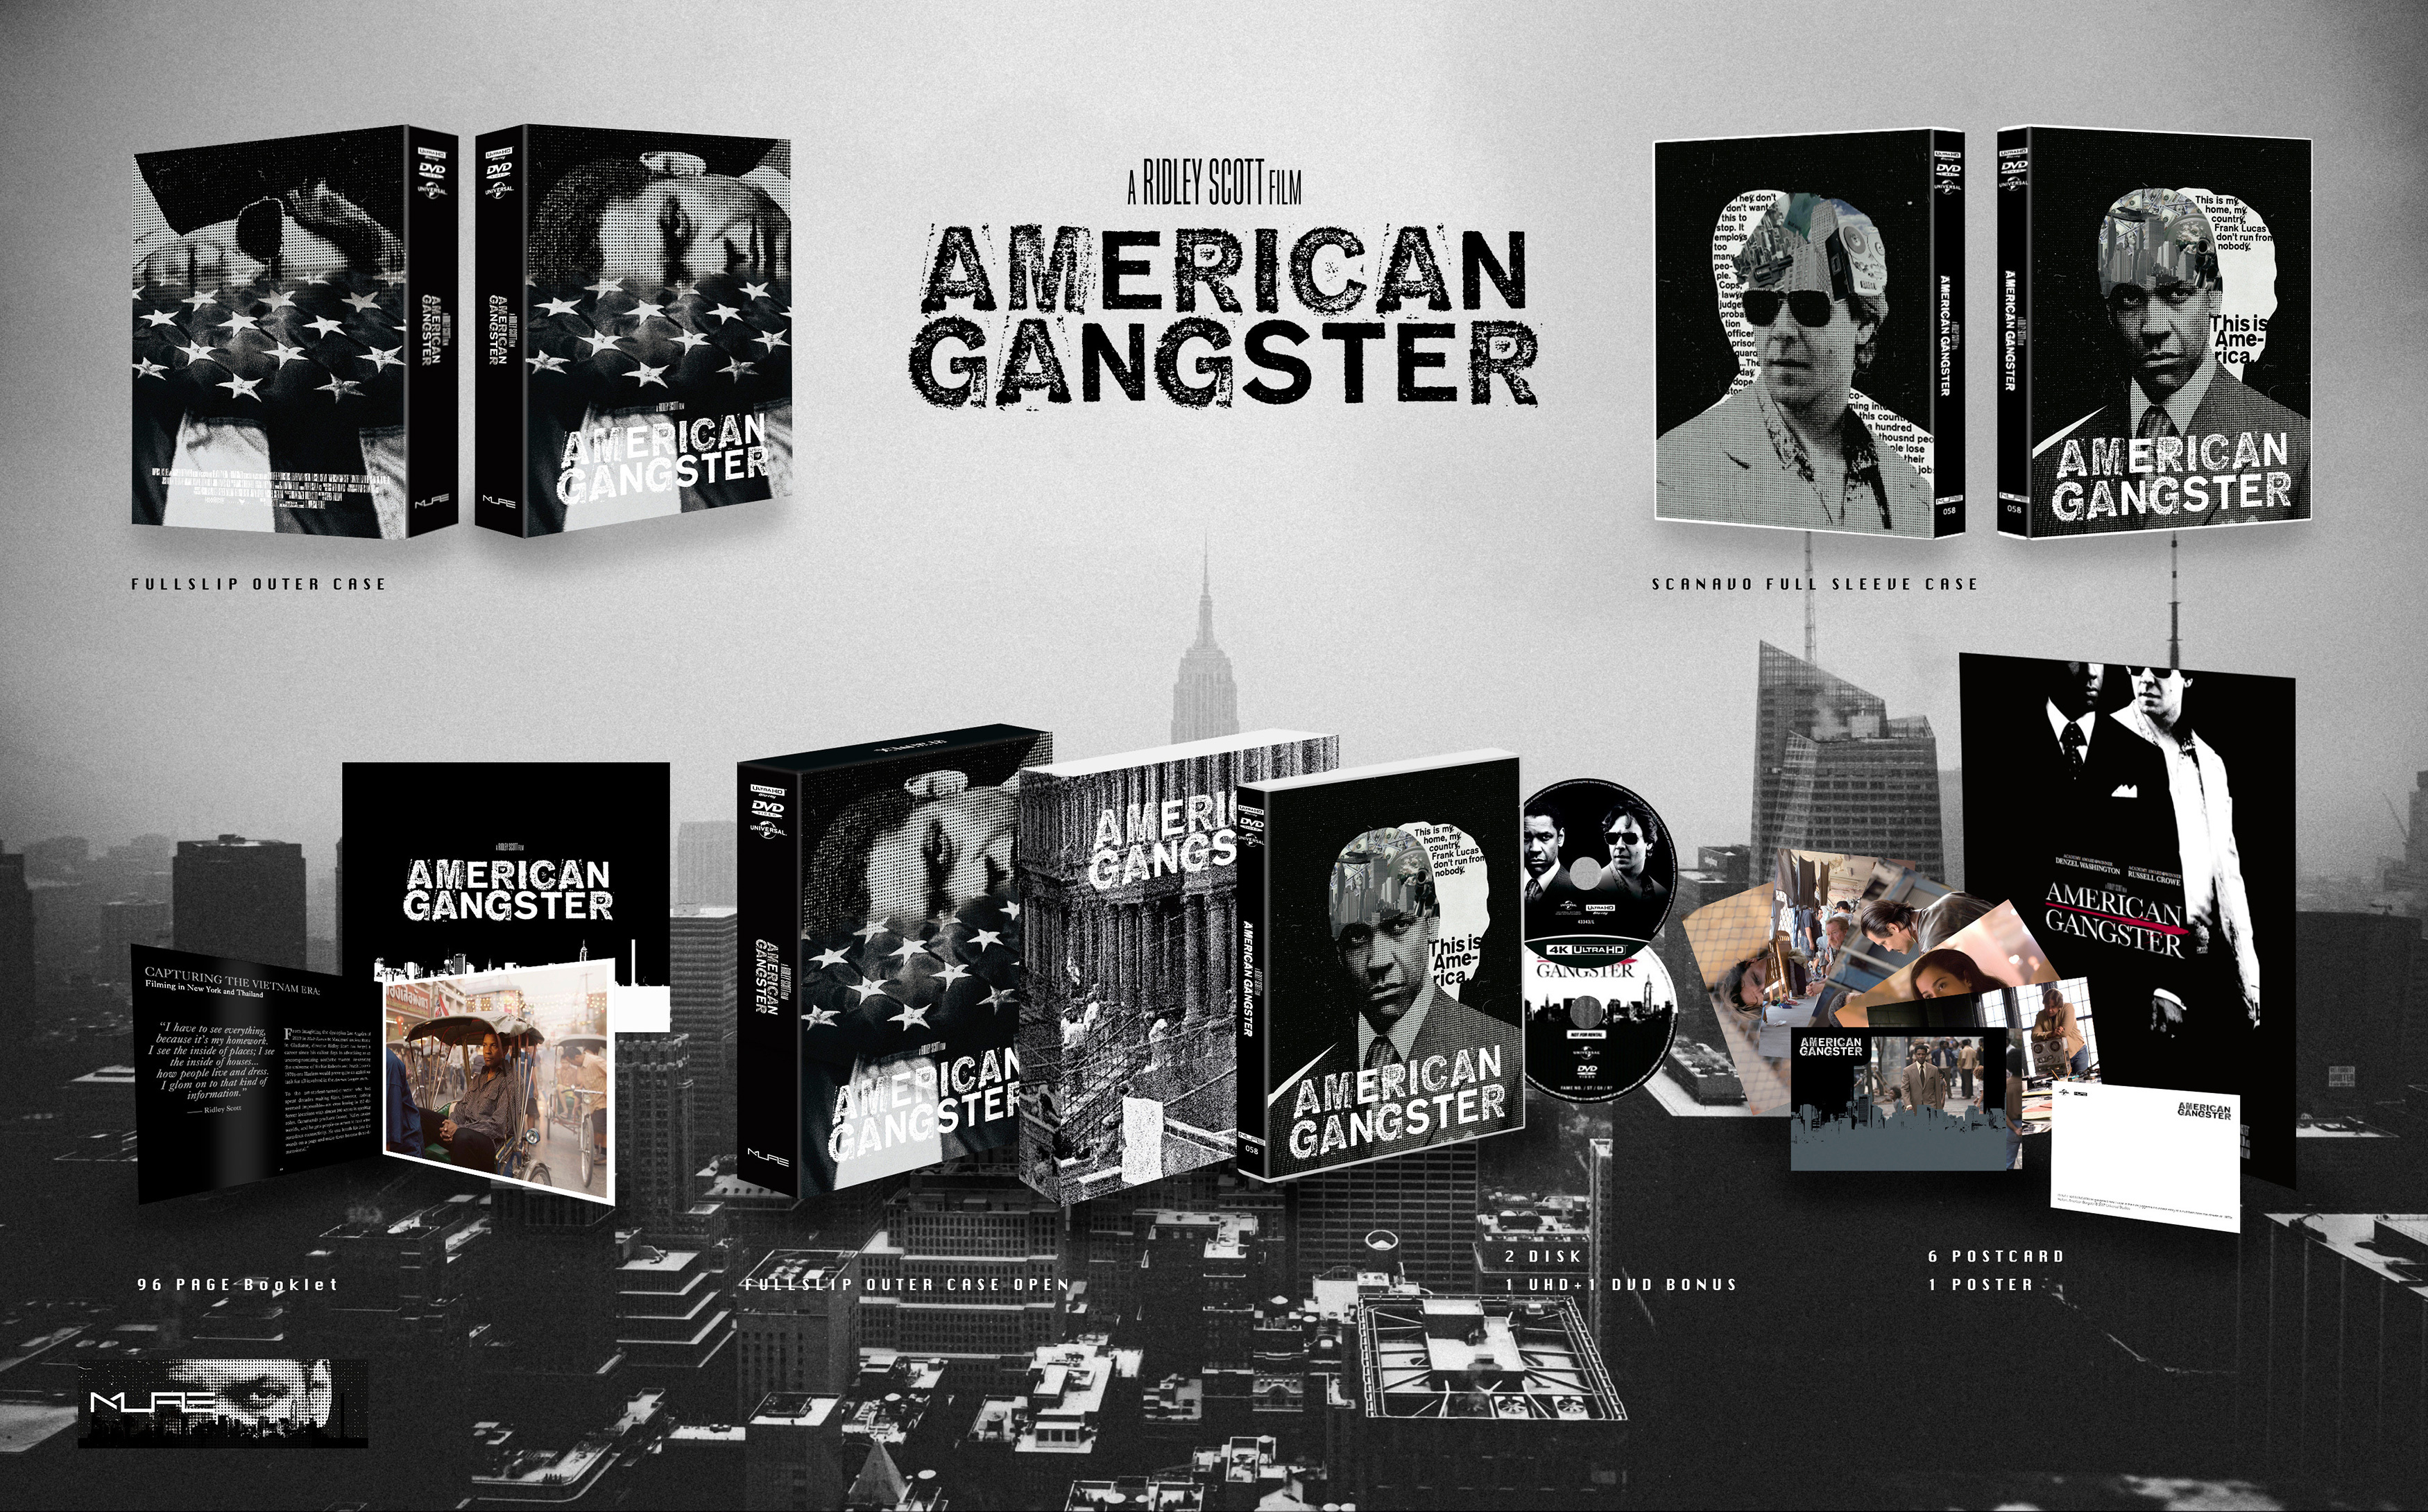 American Gangster 4K Blu-ray (MLIFE Exclusive 058, Limited Edition